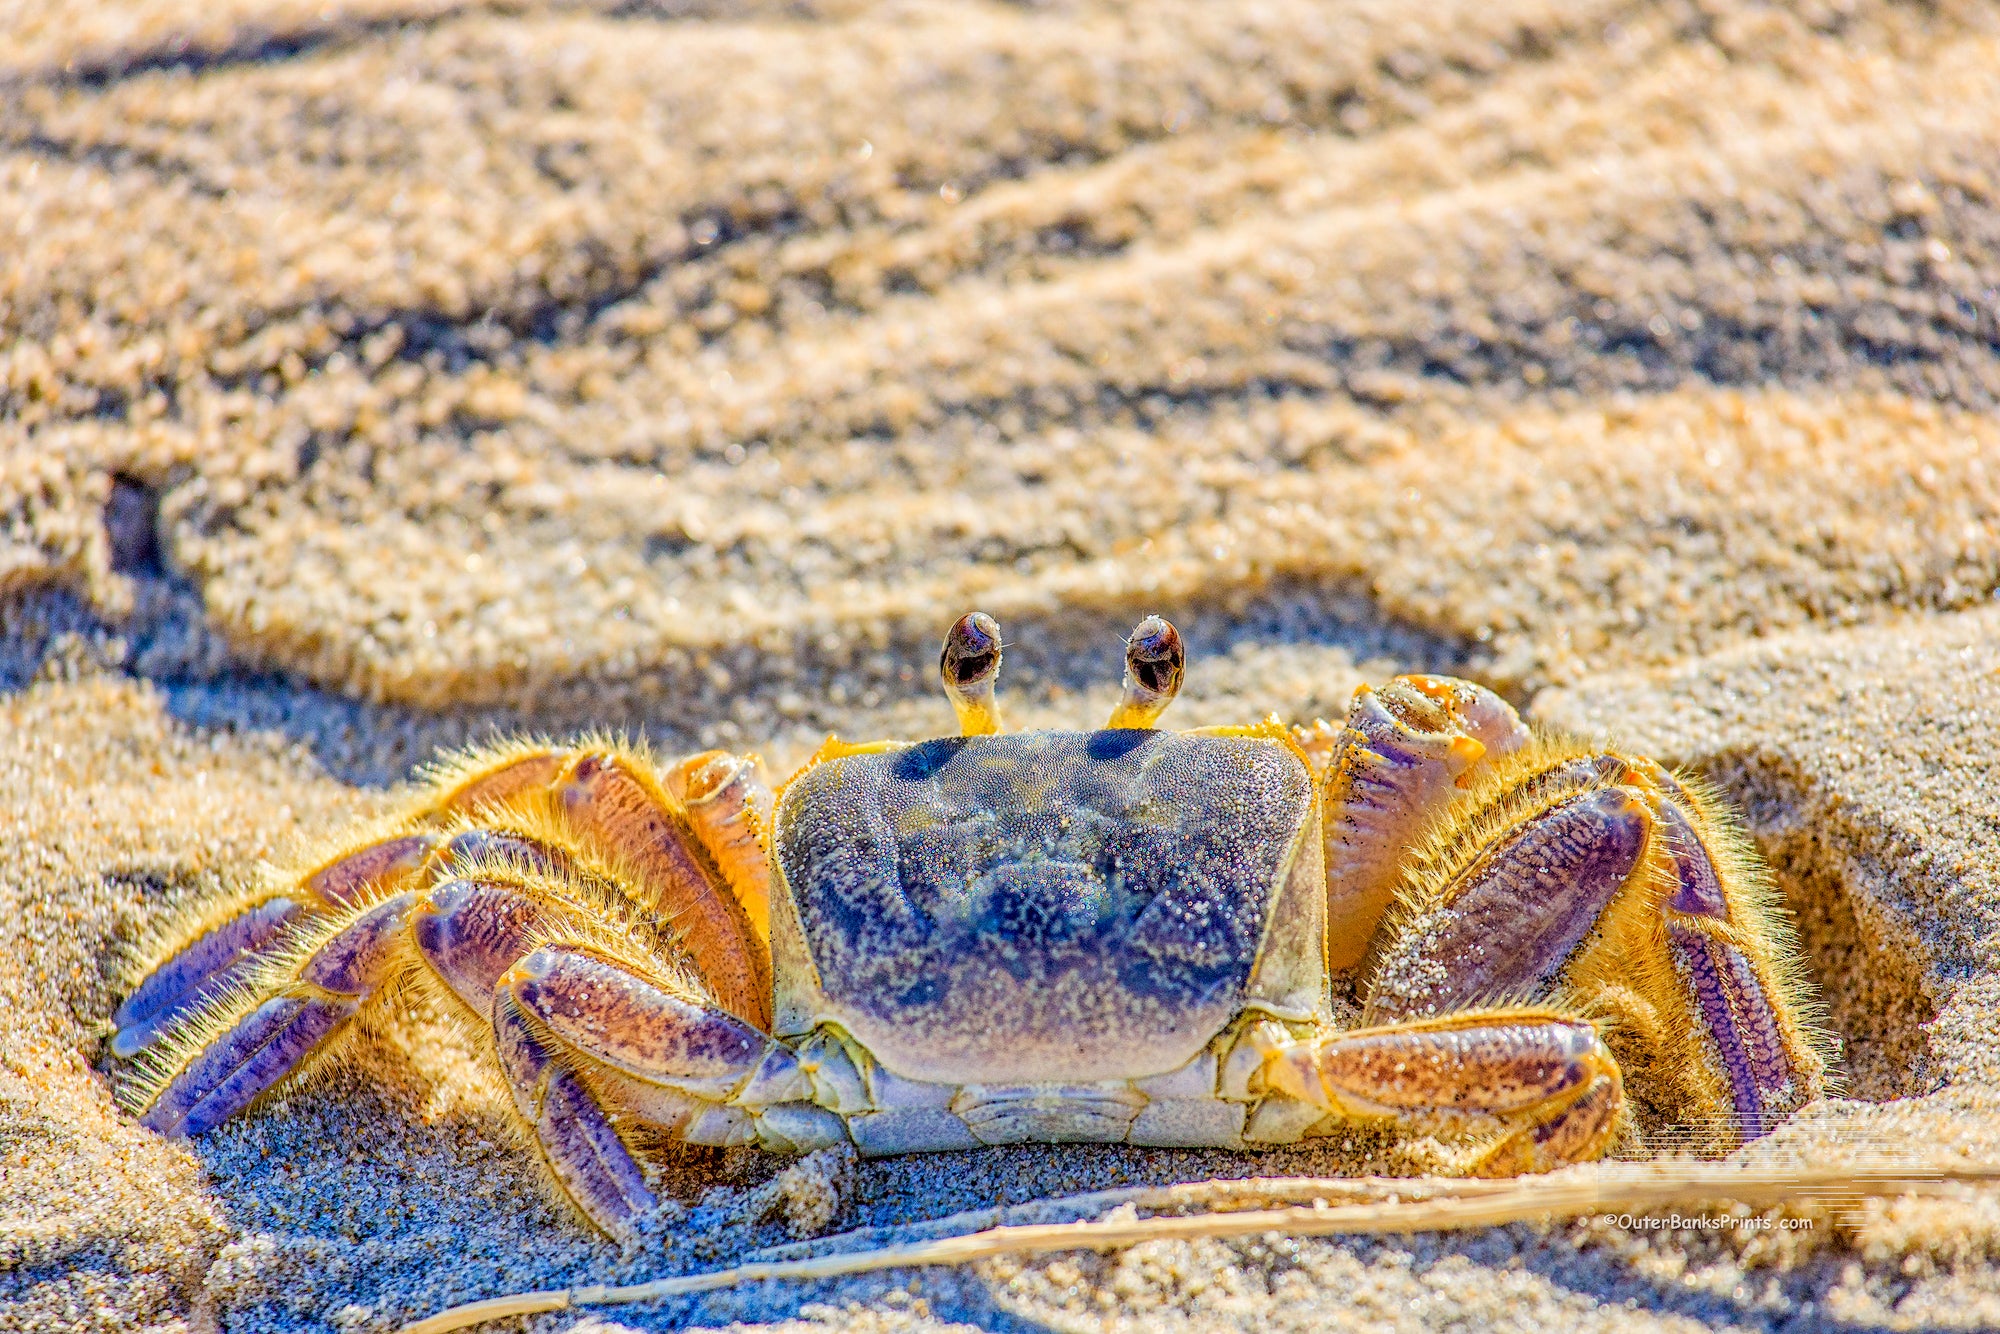 Close-up of Outer Banks ghost crab photographed in Corolla on the Outer Banks of NC.